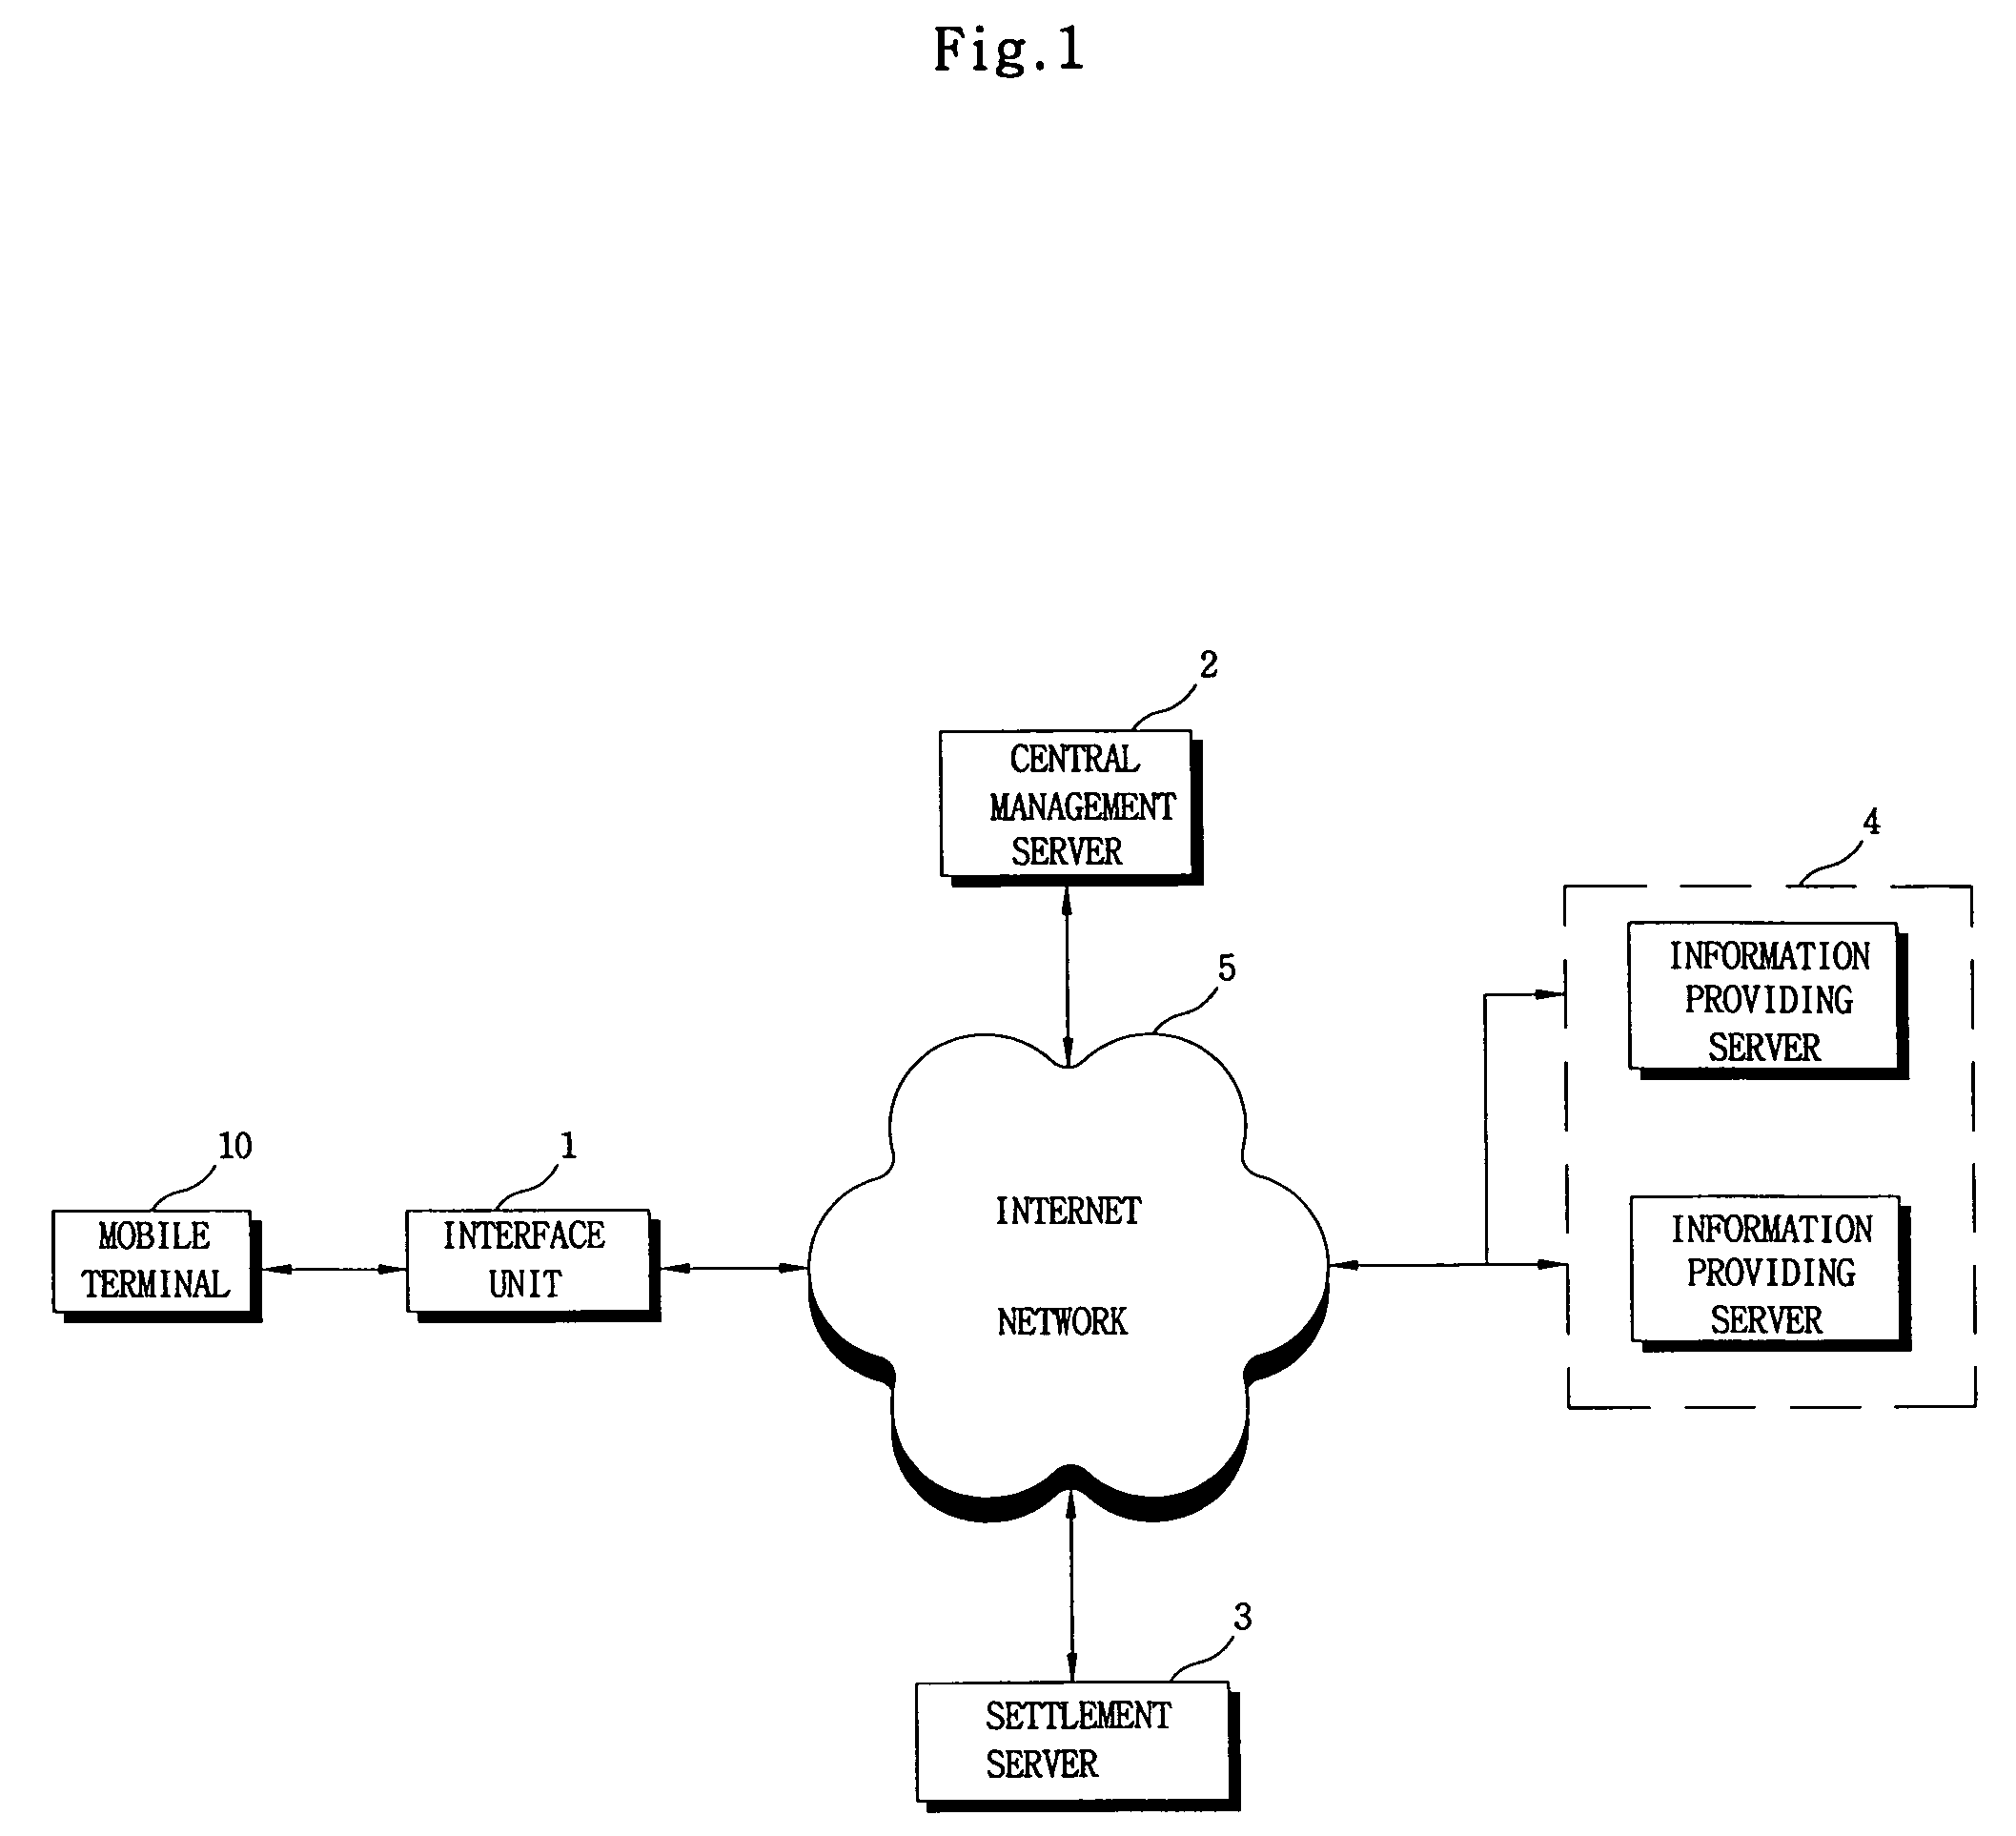 Internet interface service system and method providing public internet access to users carrying mobile terminals